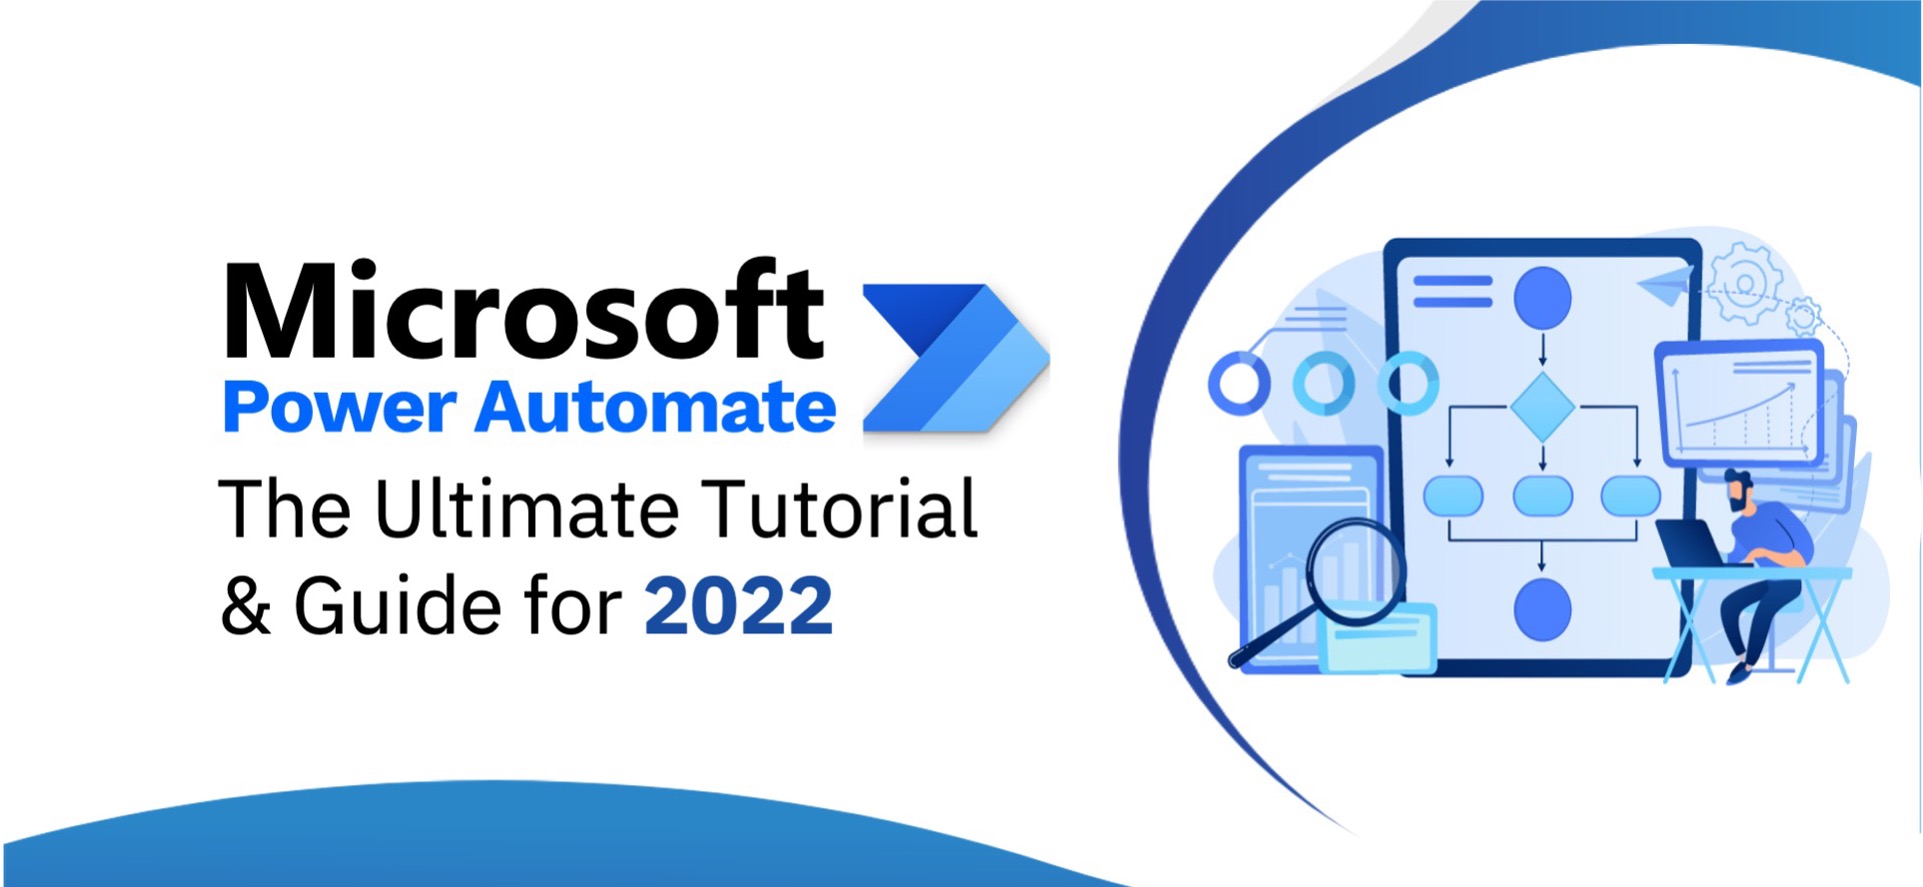 Microsoft Power Automate - The Ultimate Tutorial & Guide for 2022